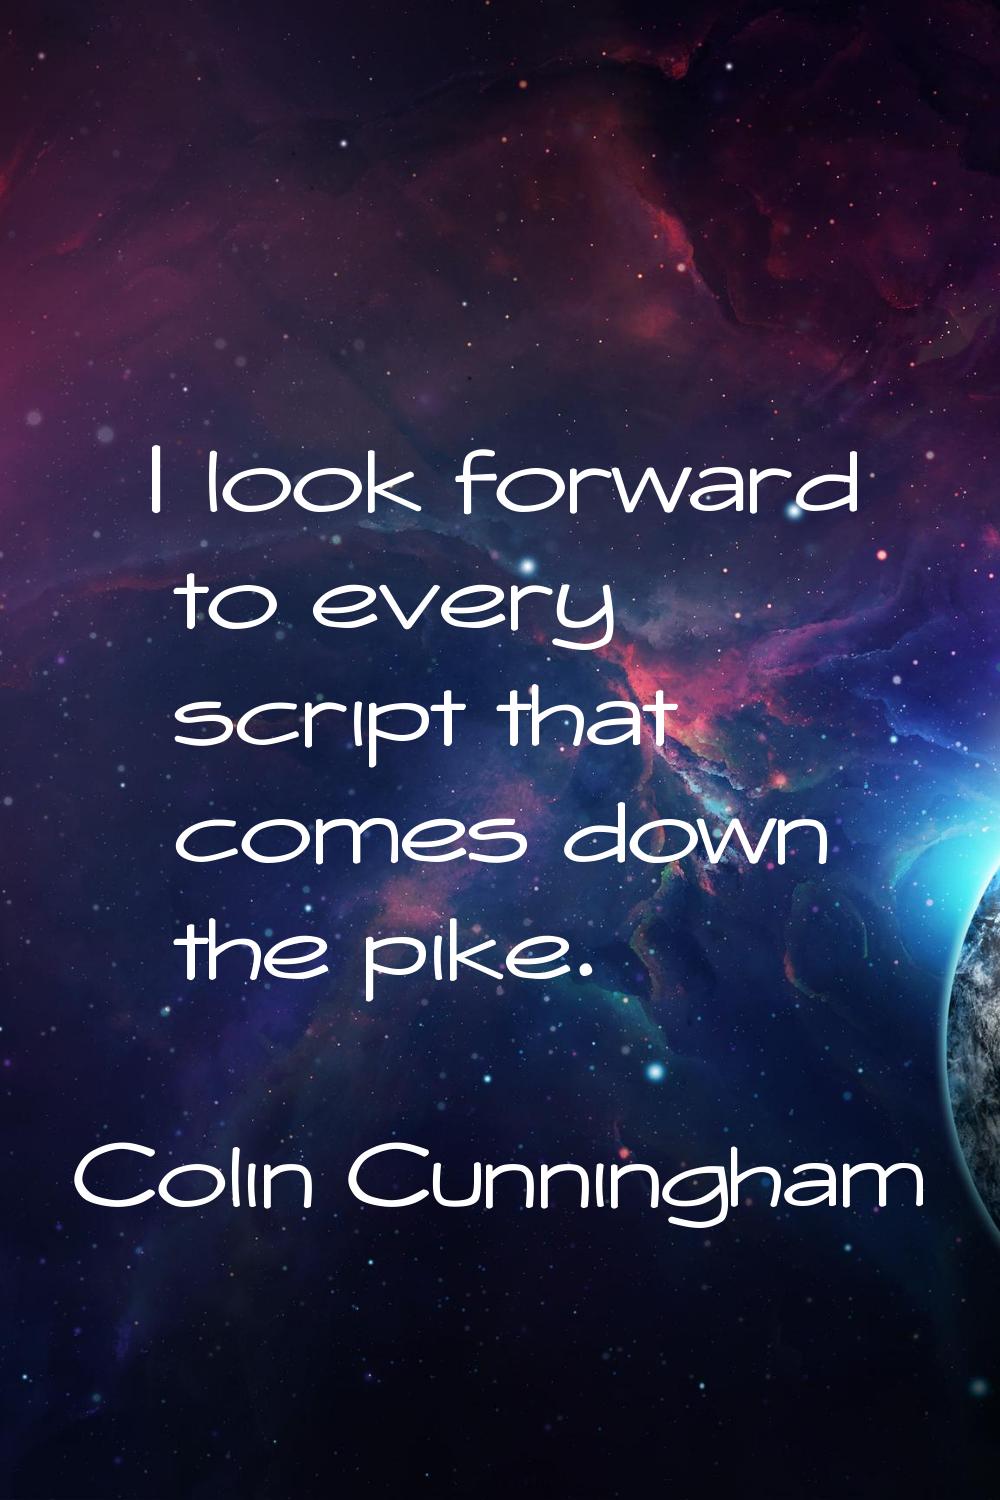 I look forward to every script that comes down the pike.